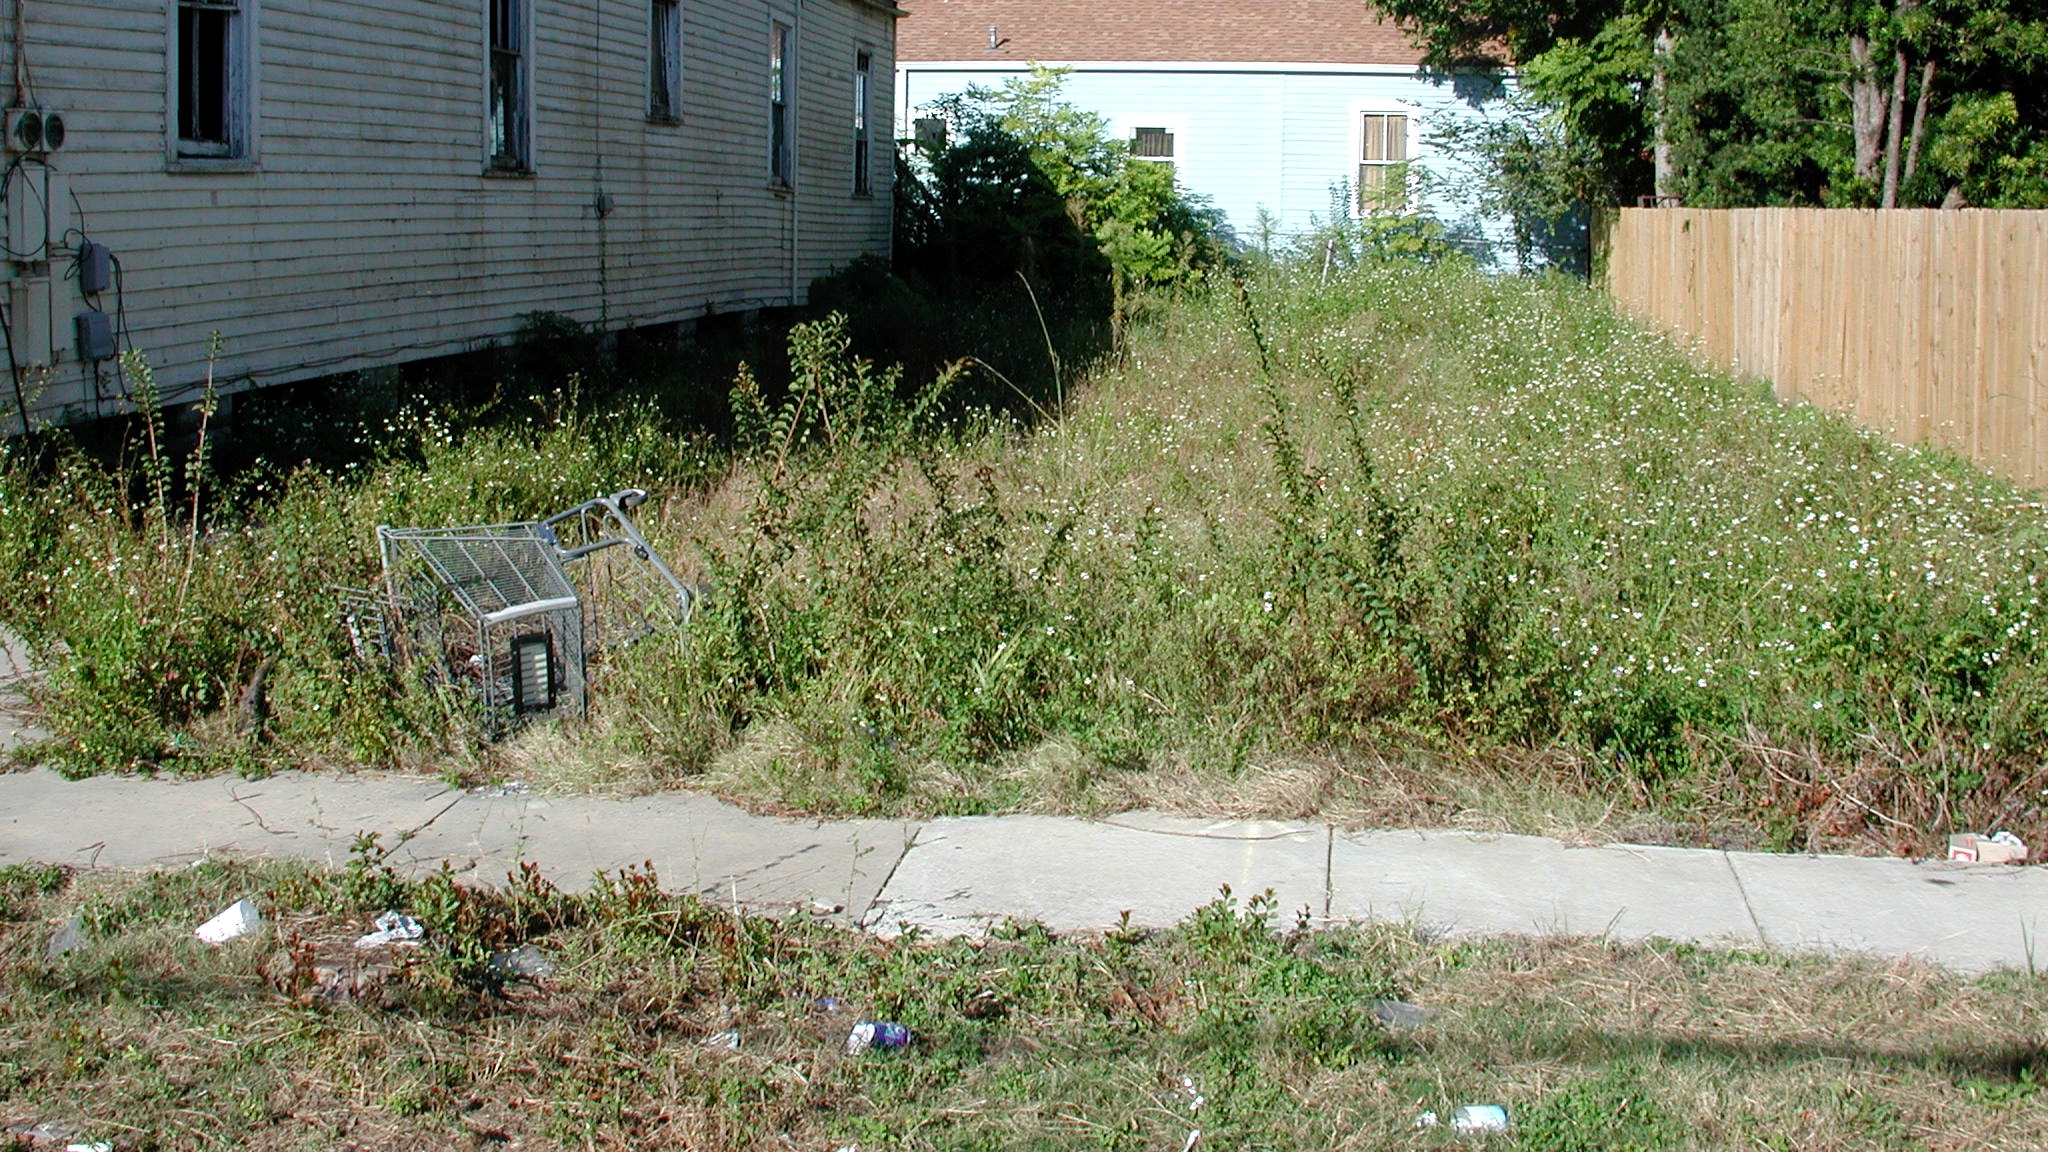 chicago land clearance commission blight definition